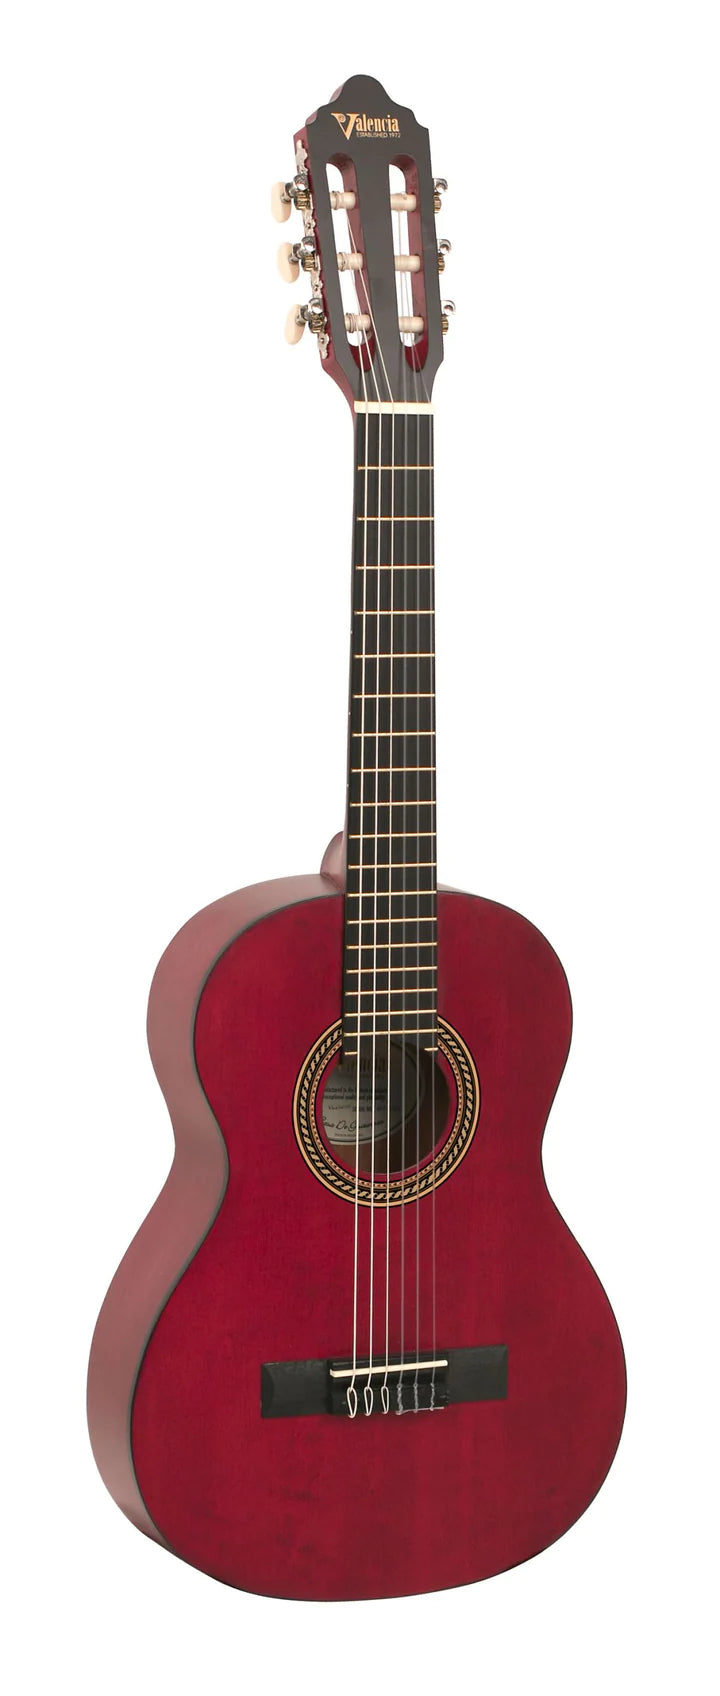 Valencia VC202TWR 1/2 Size Classical Guitar - Transparent Wine Red